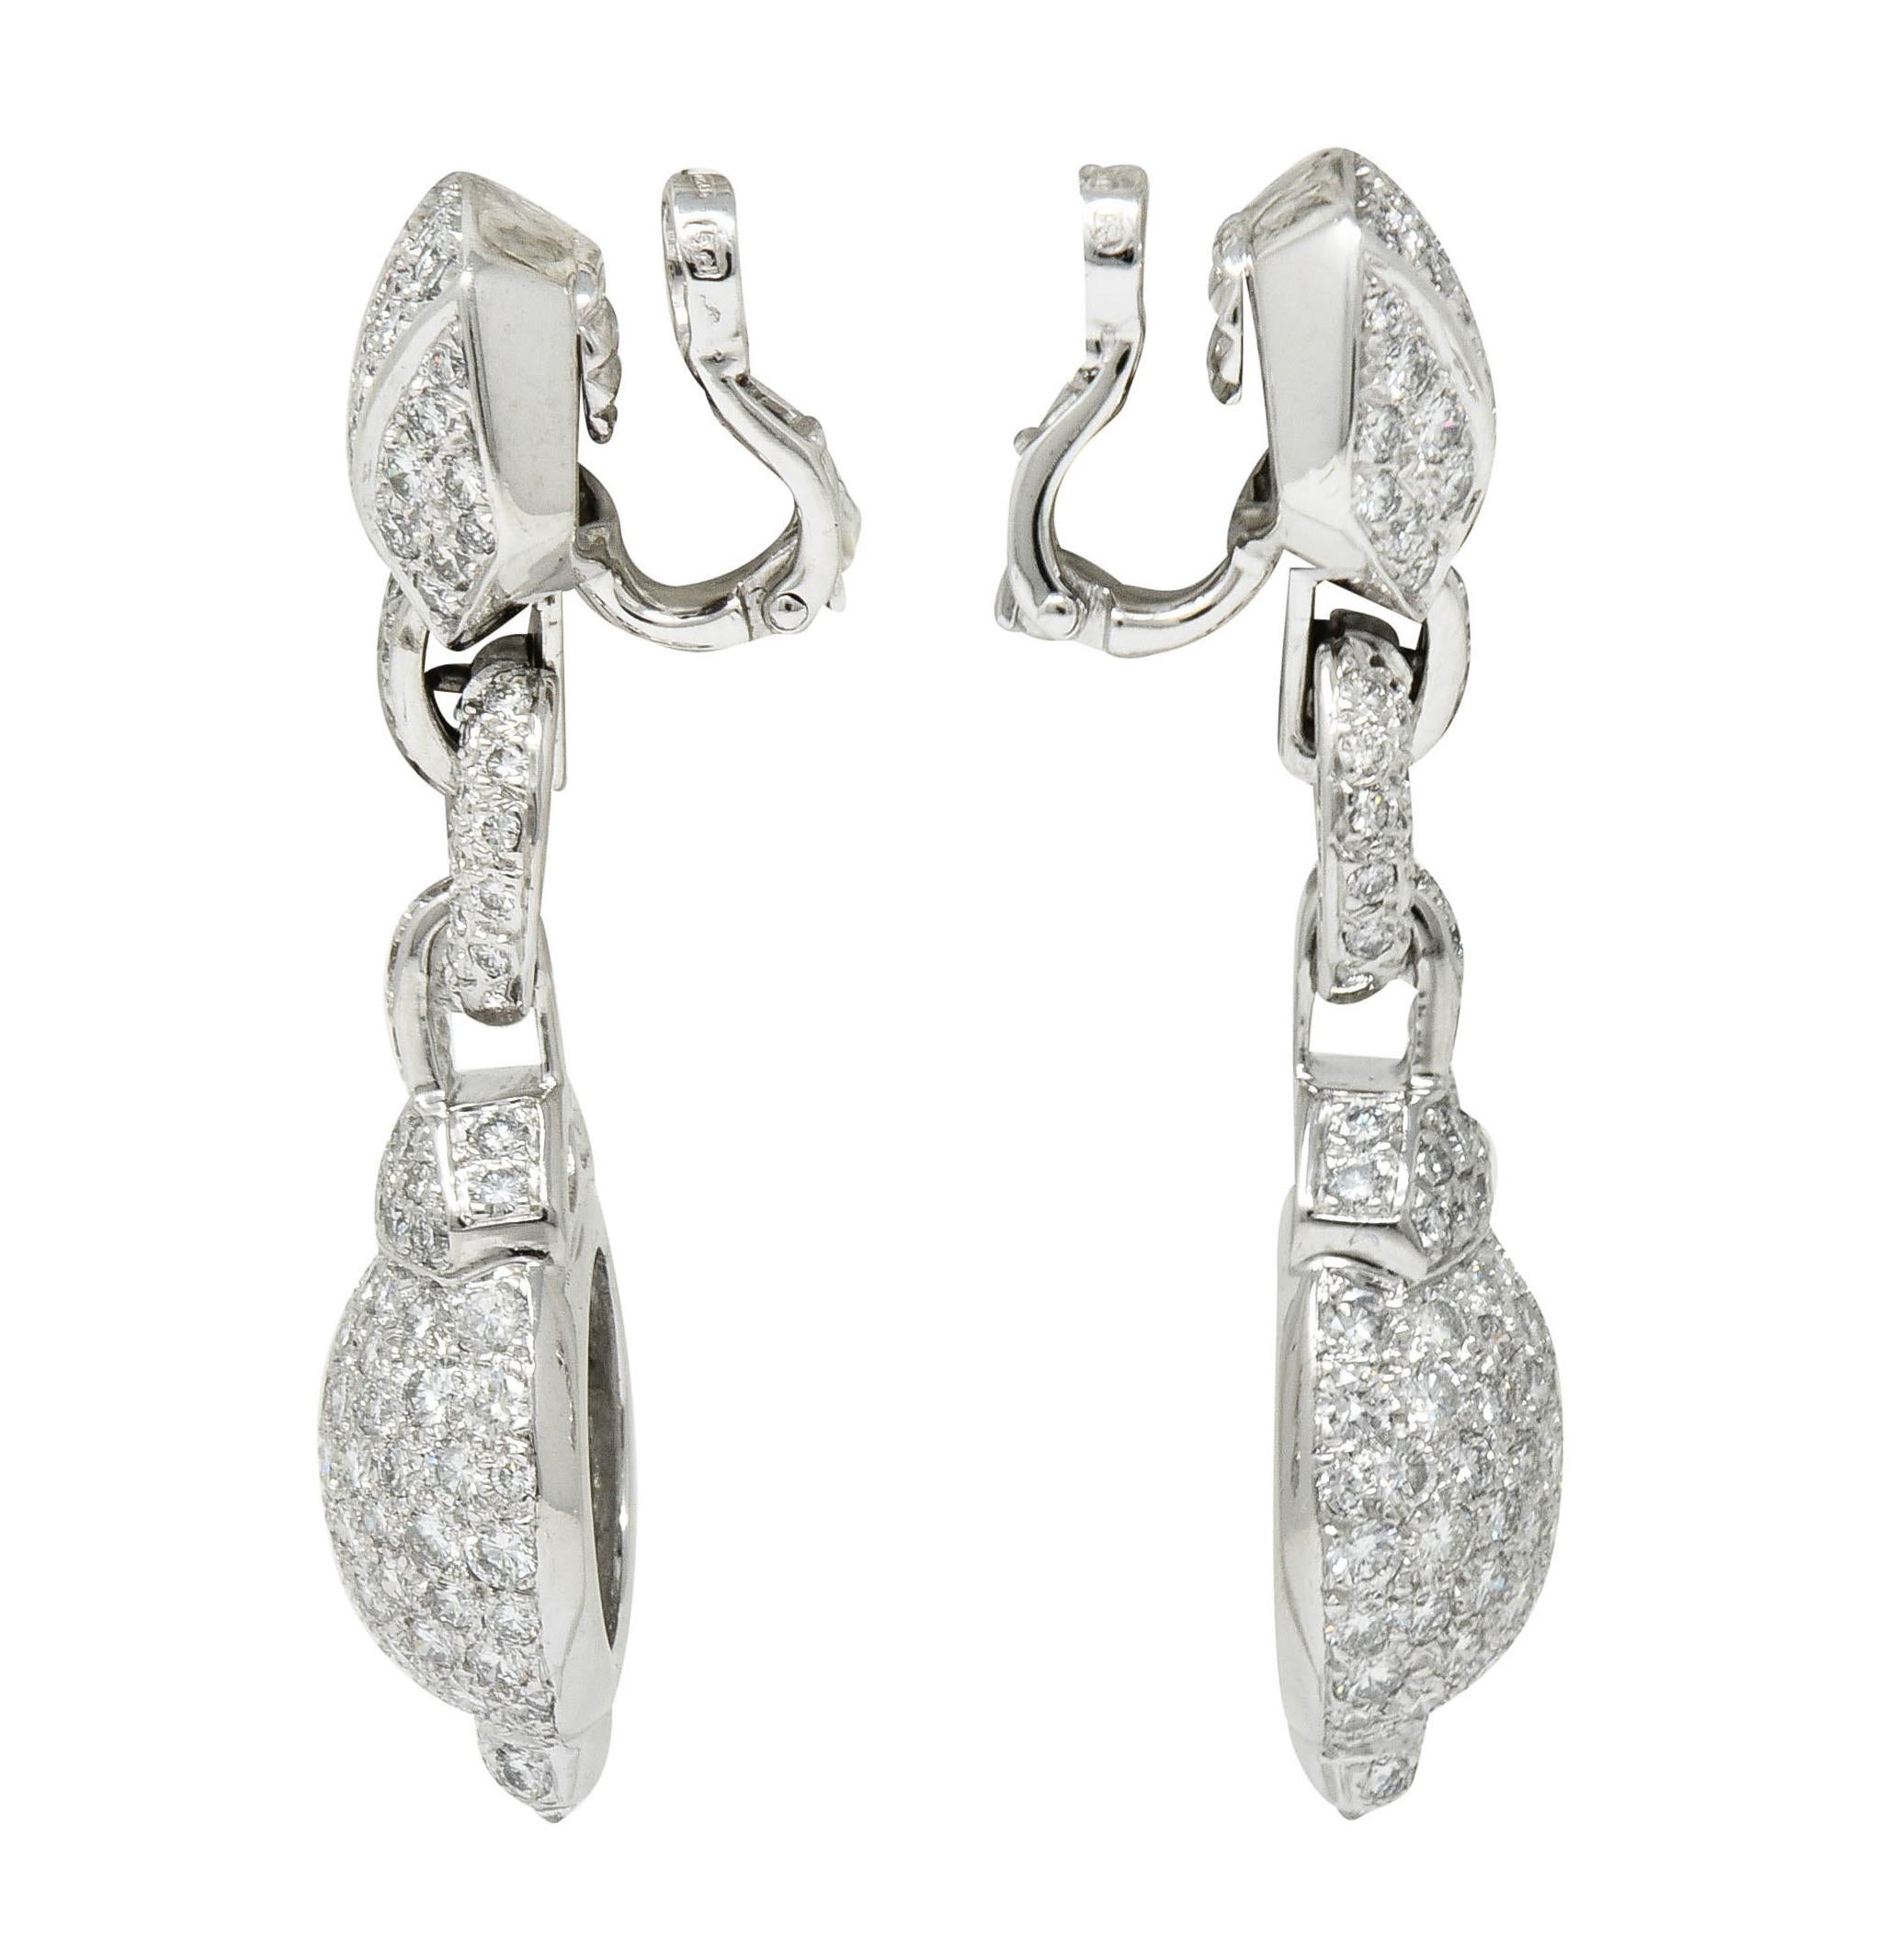 Ear-clip earrings are designed as an articulated linkage motif suspending a bulbed drop

Pavé set throughout by round brilliant cut diamonds weighing in total approximately 7.50 carats; F/G color with VS clarity

Completed by hinged backs

Numbered